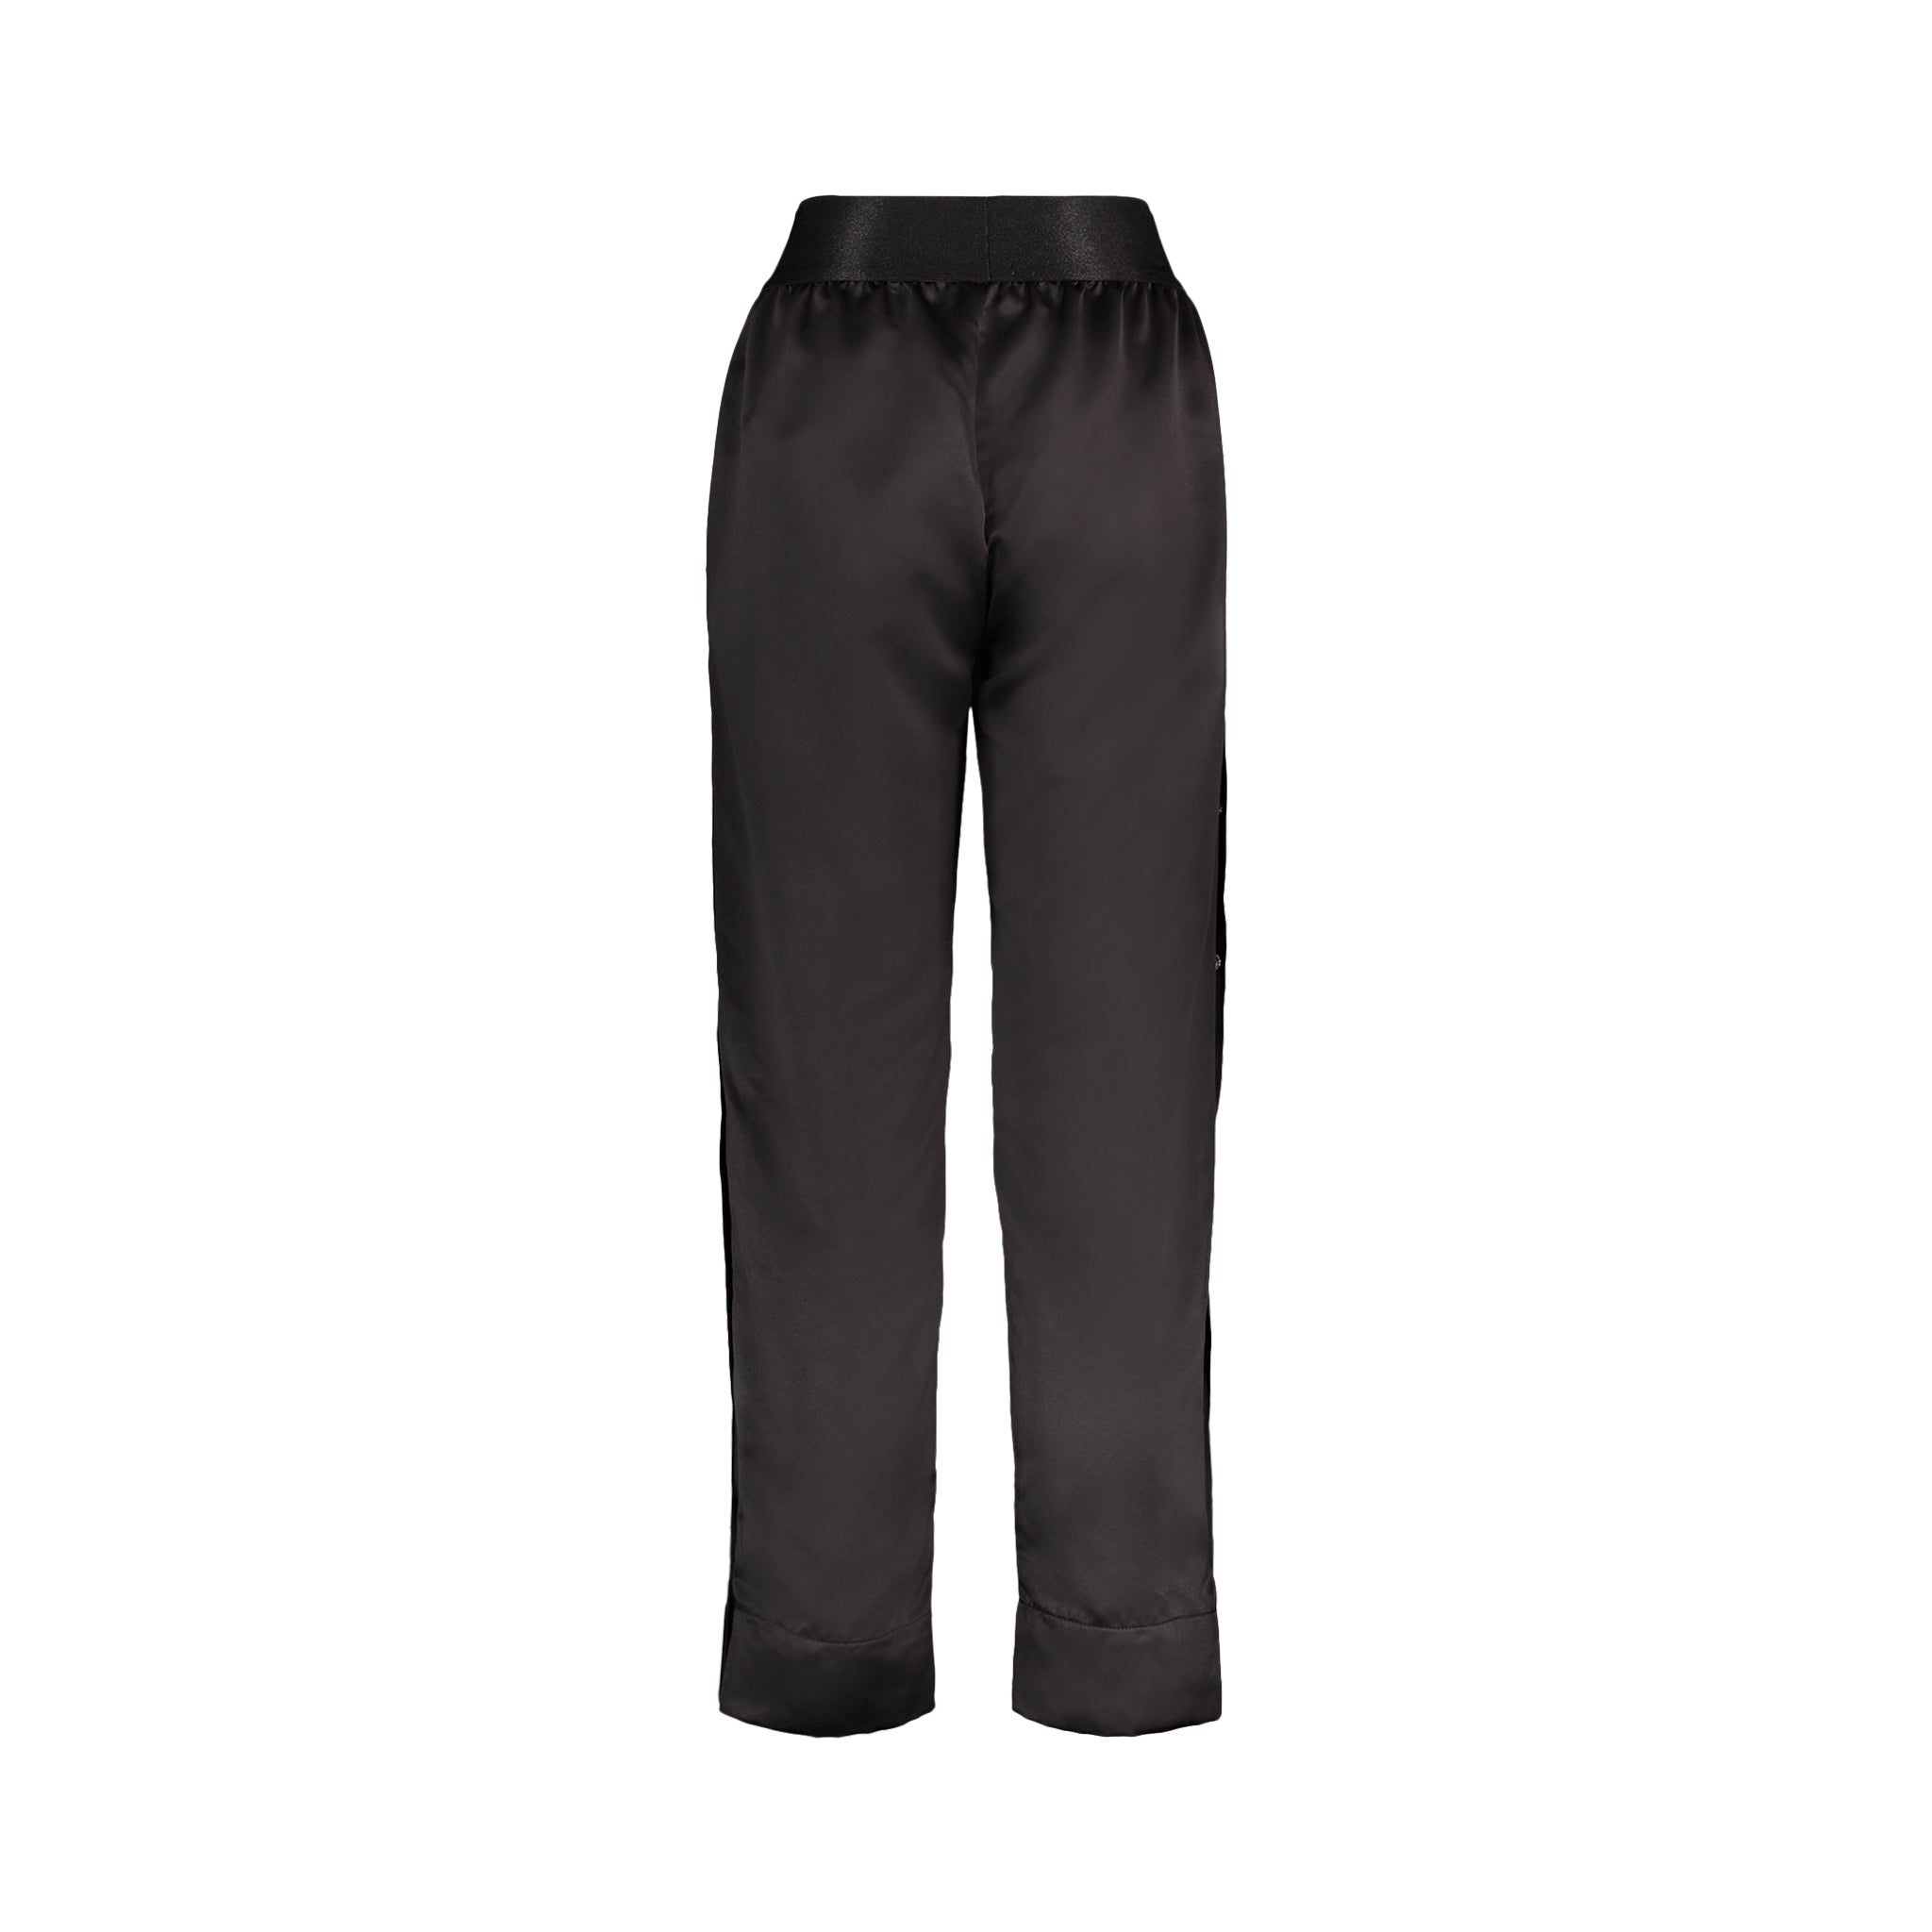 Clubmaster Track Pants freeshipping - LLESSUR NYC